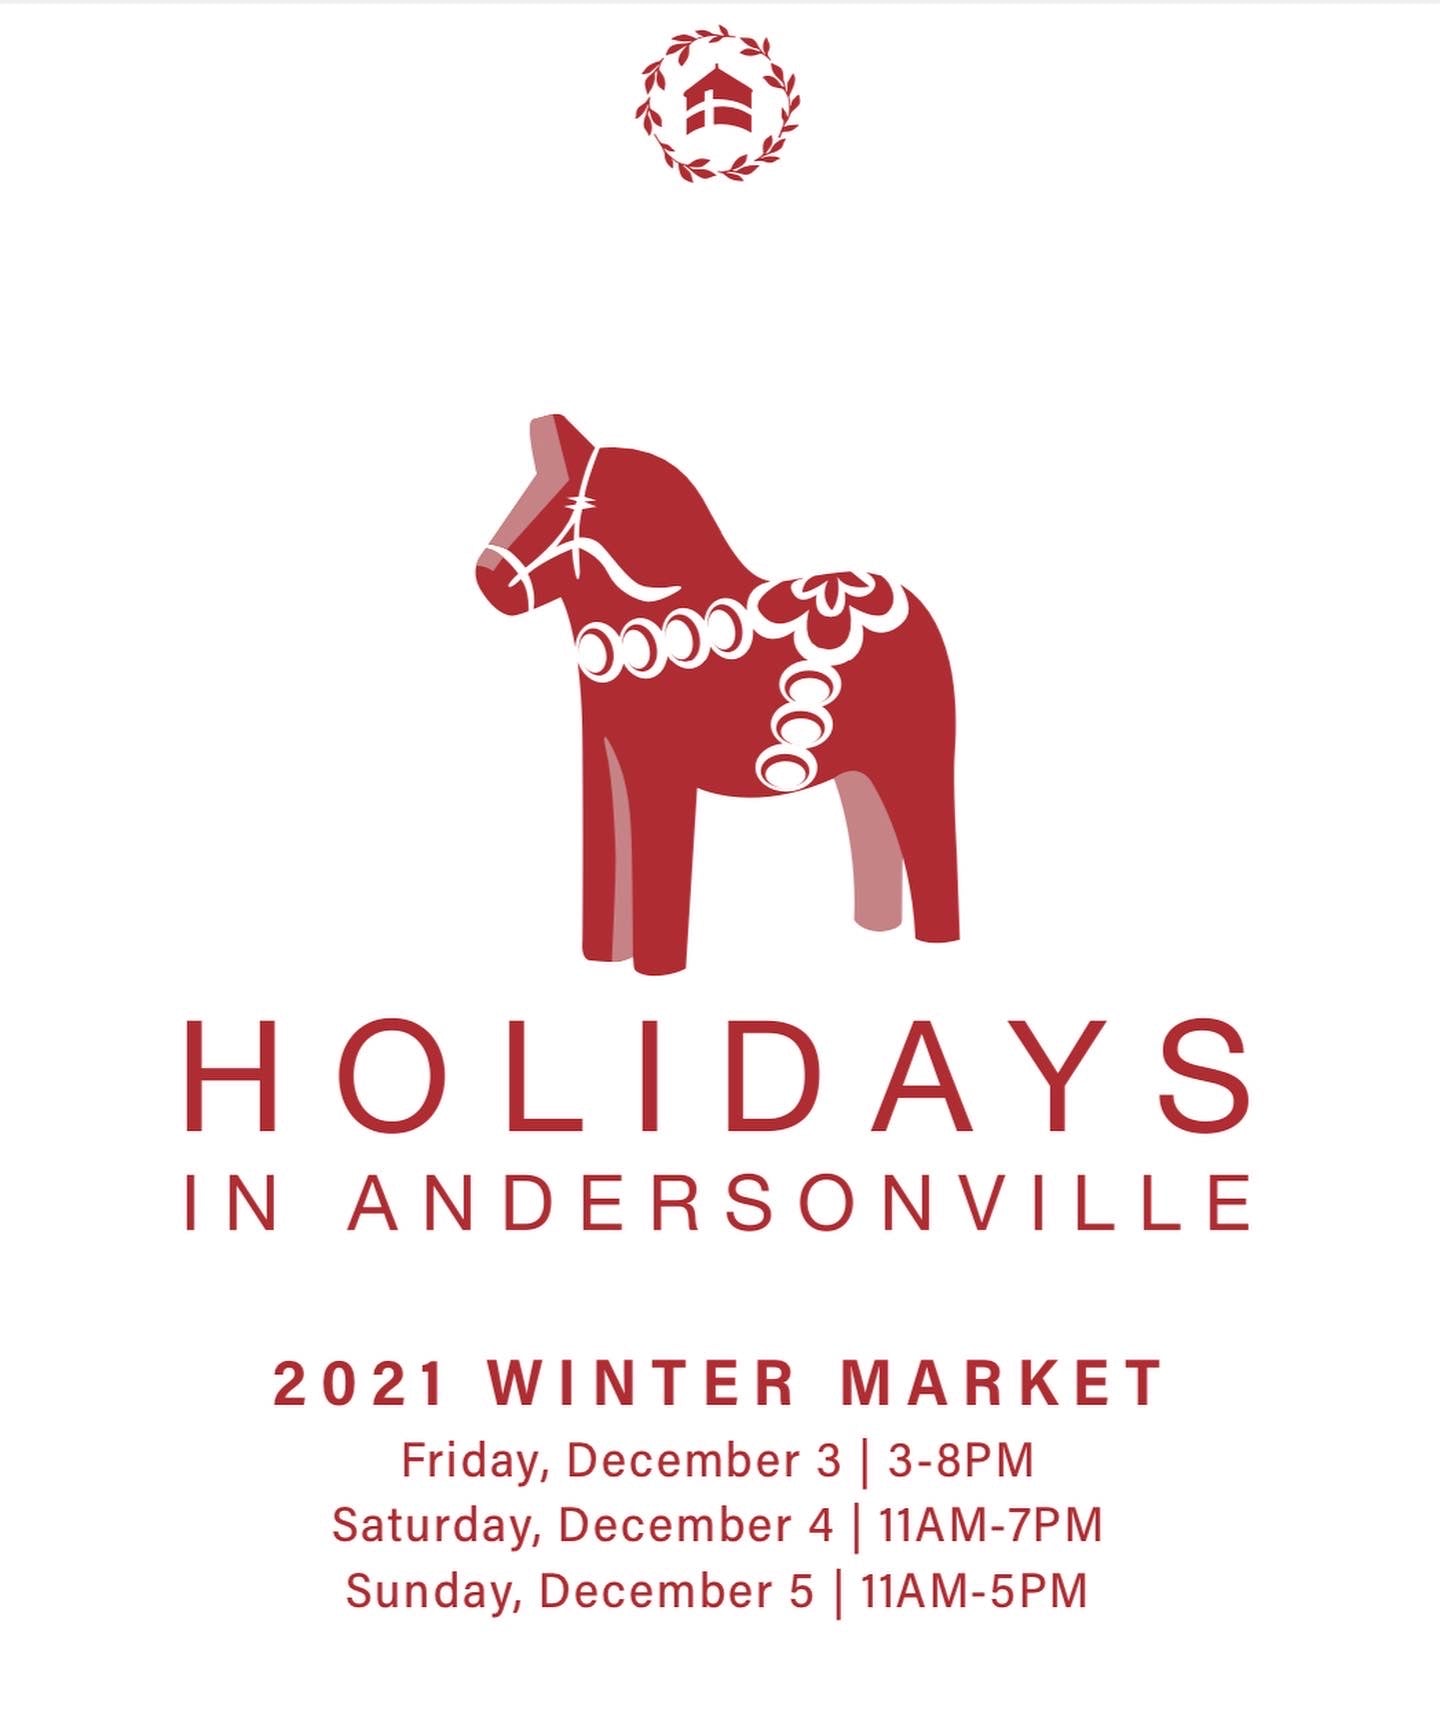 Holidays in Andersonville Winter Market Event